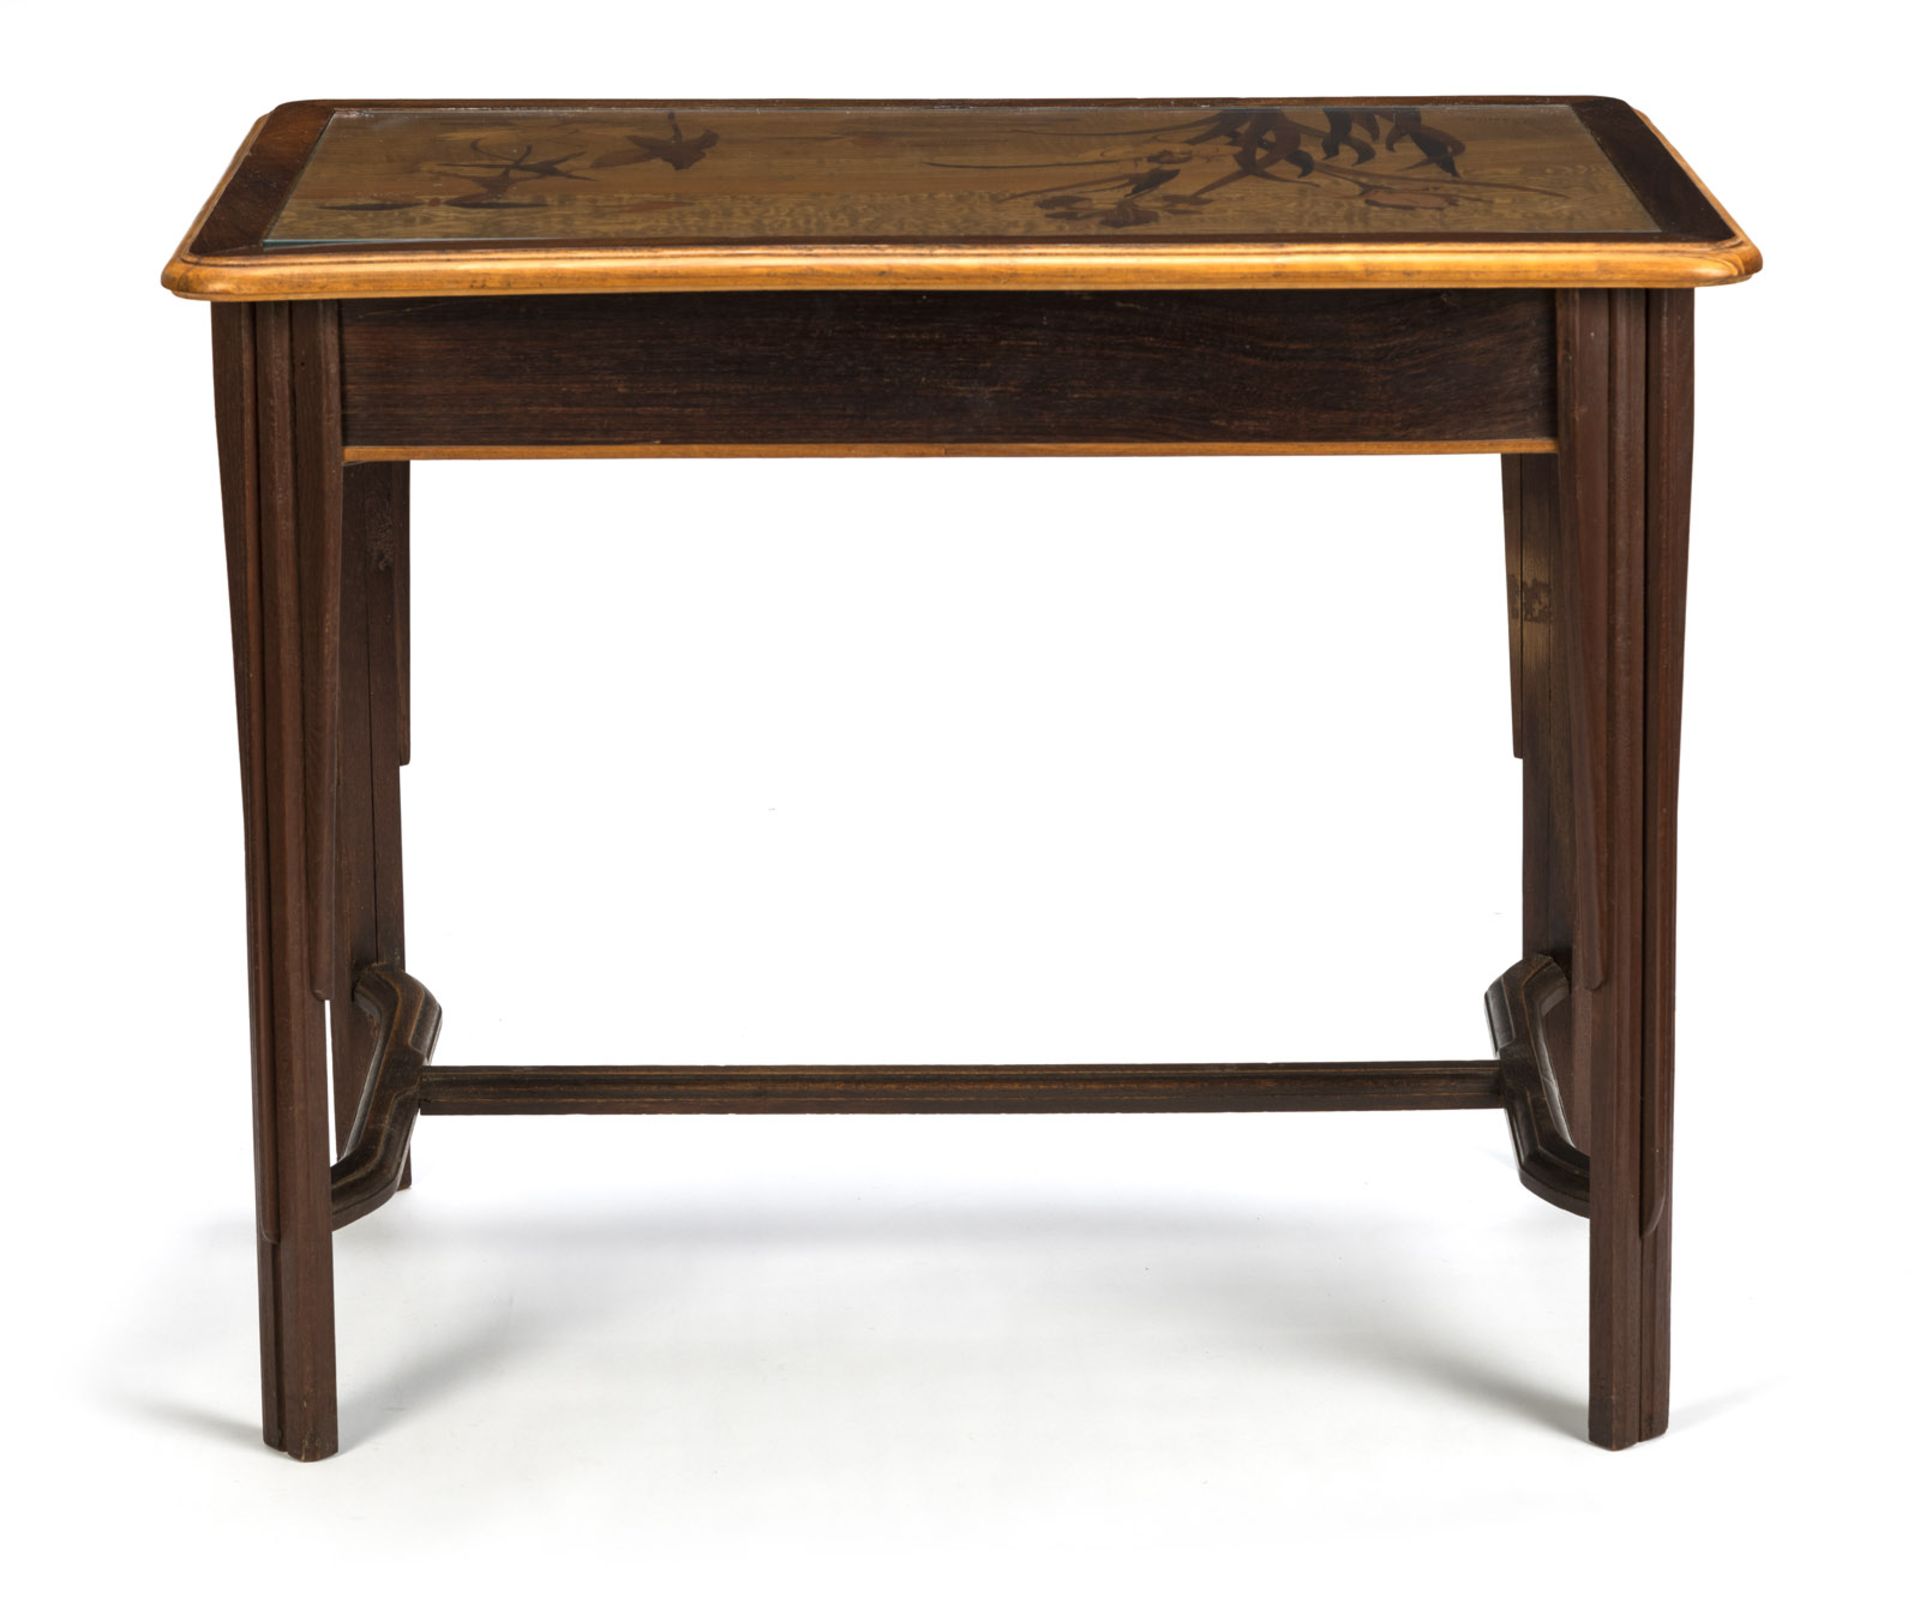 AN ART NOUVEAU FLORAL TOOLED PALISANDER, OAKWOOD, MAHOGANY, ROOTWOOD AND ASH WRITING DESK - Image 5 of 8